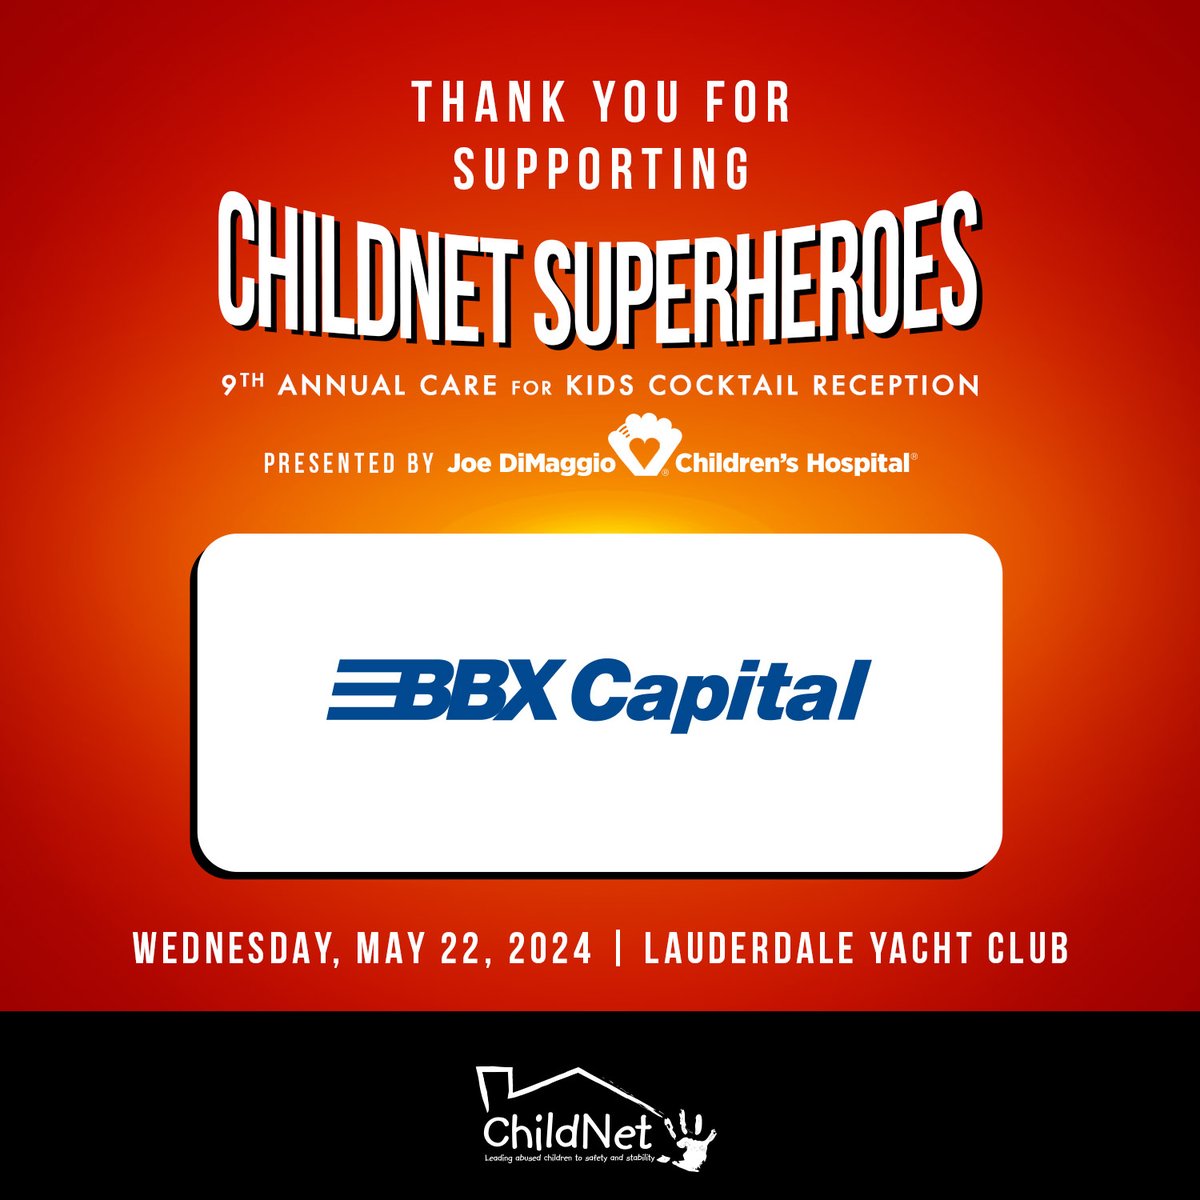 Thank you @bbxcapital for becoming a sponsor of the 9th Annual Care for Kids Cocktail Reception!